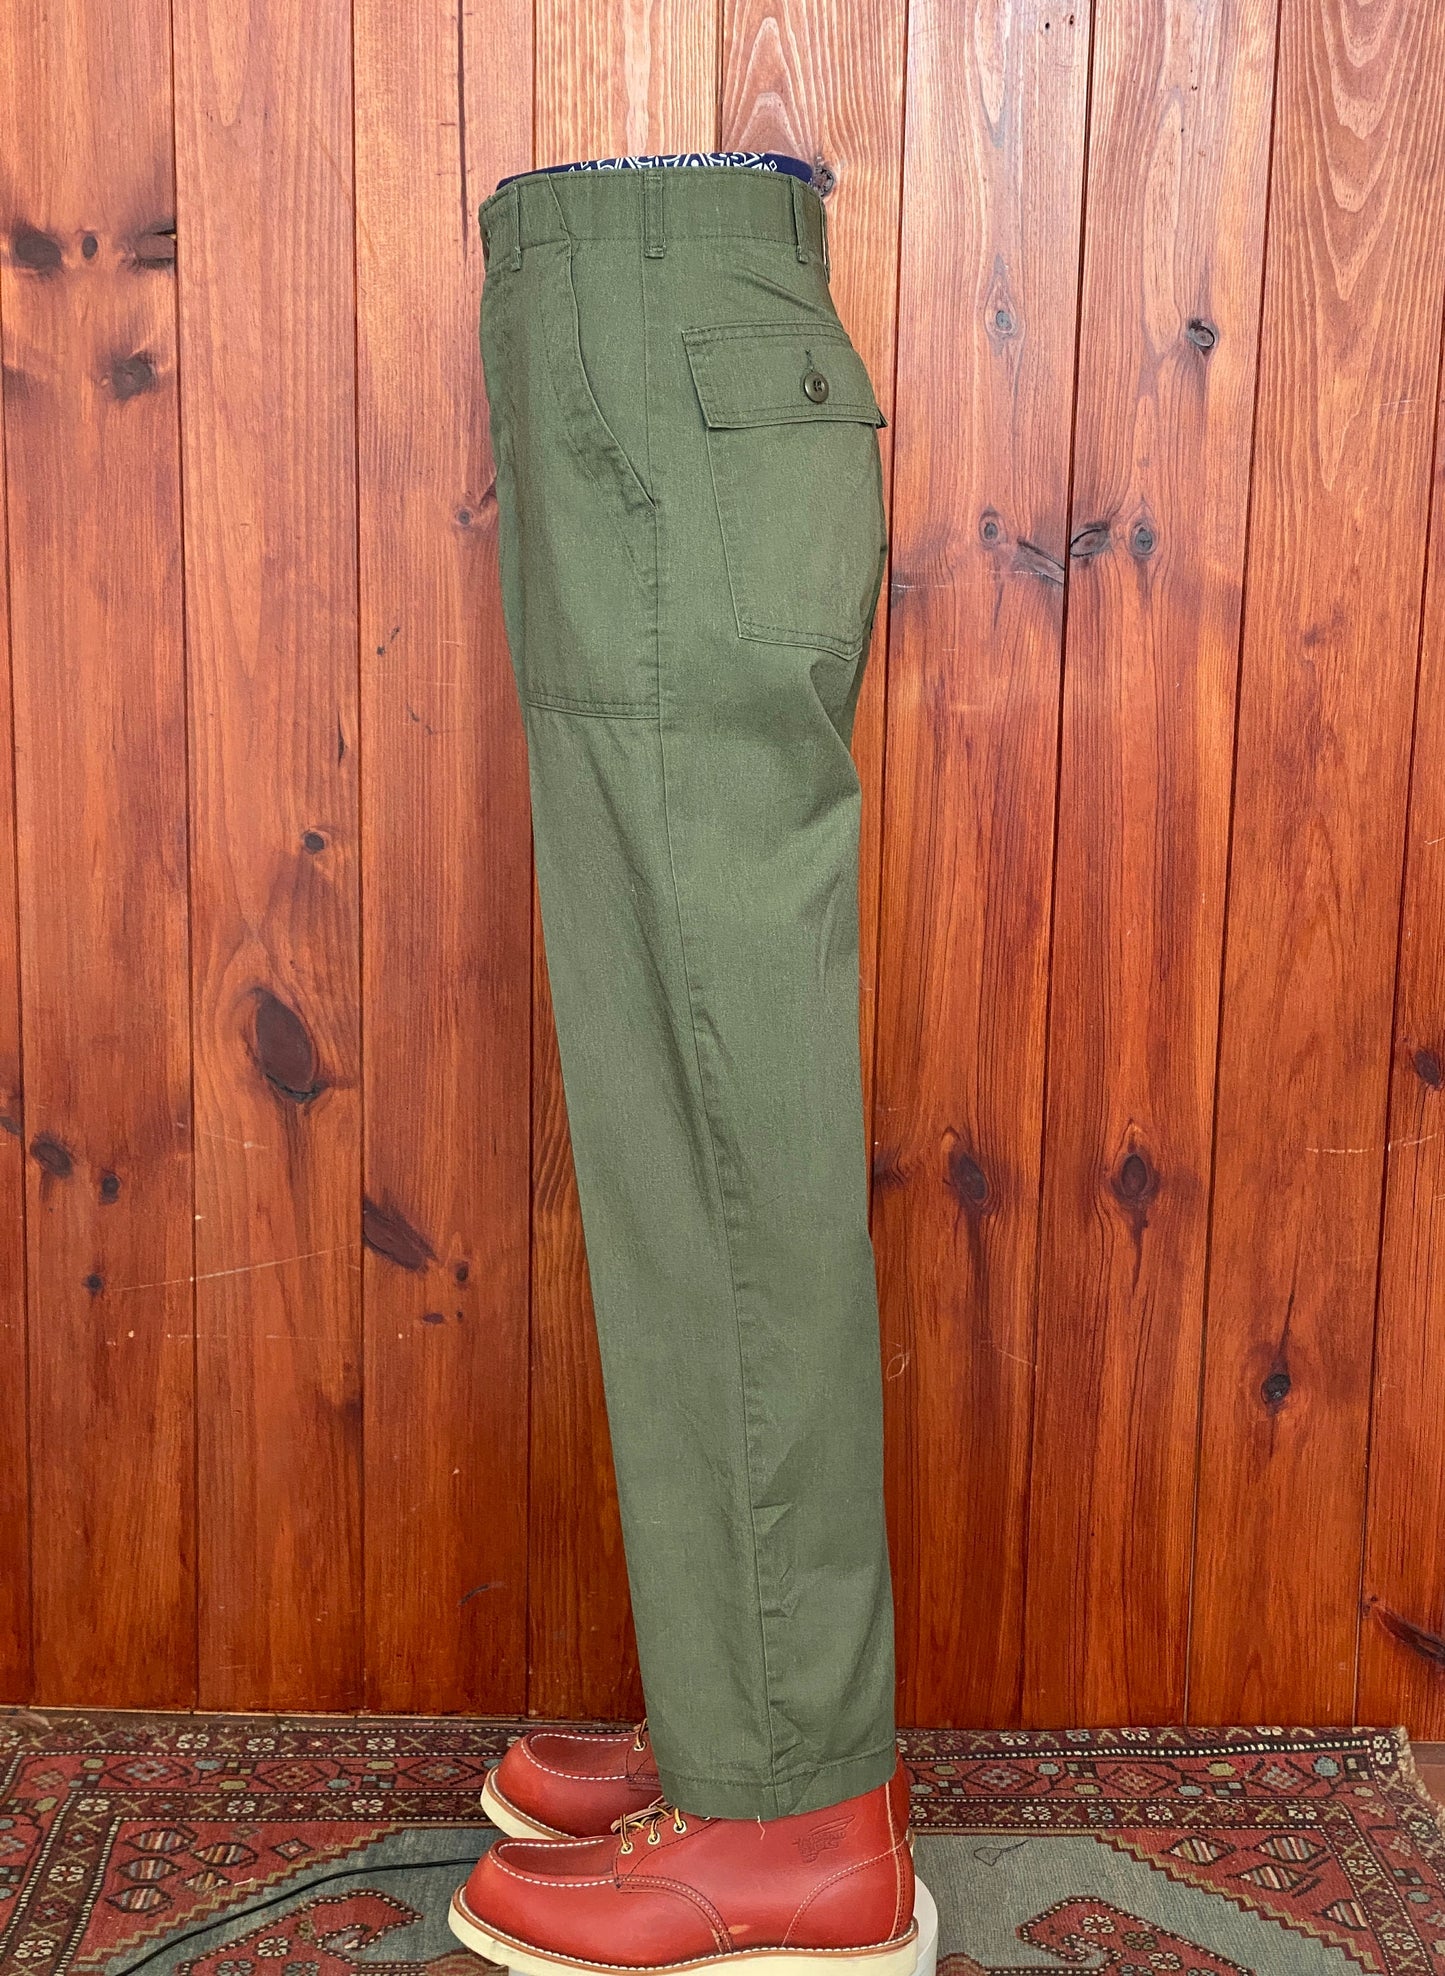 Authentic Vintage 1984 US Army OG-507 Fatigue Pants 30X31 | Classic Military Wear